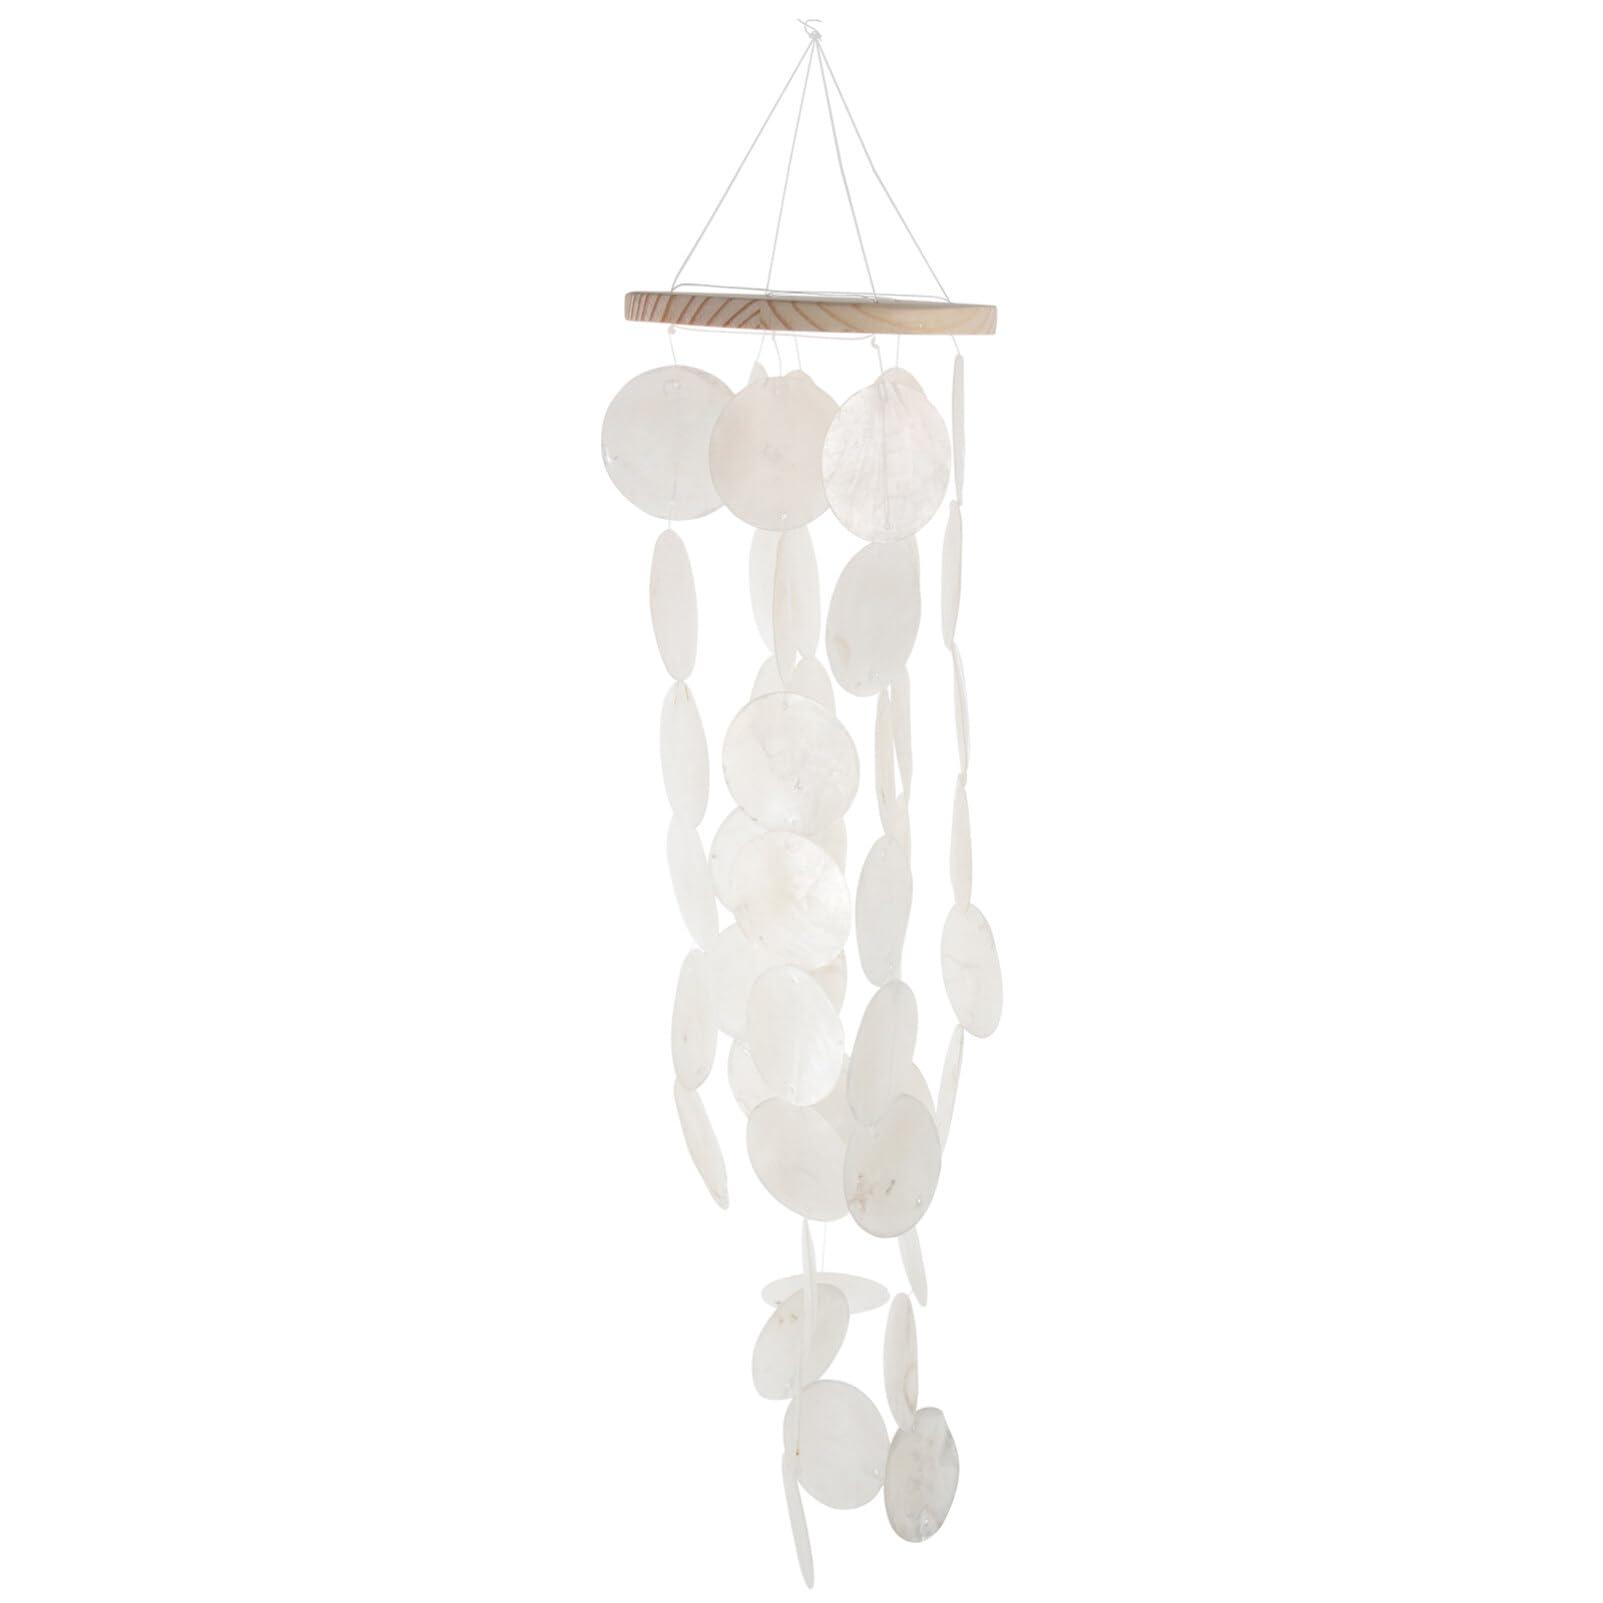 Abaodam Sea Memorial of Decor Memory Capiz Bell White Loss Chime One Patio Home Indoor Wind Shell Living Chimes Prime Shells Sympathy Bedroom Loved Room A Balcony Garden Hanging for